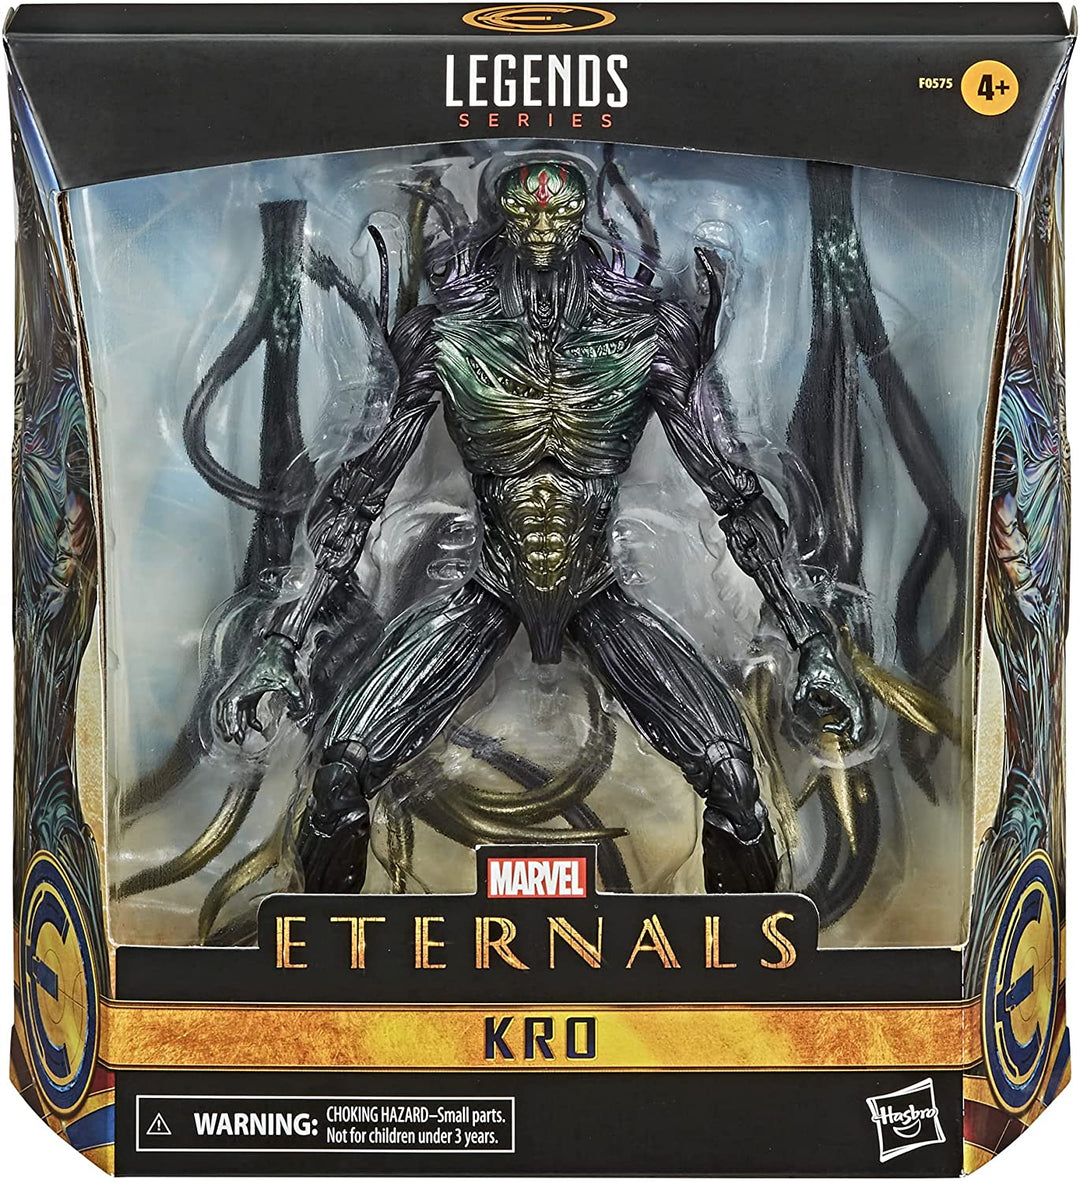 The Eternals F05755L0 Hasbro Marvel Legends Series Deluxe 6-inch Collectible Action Figure Toy Kro